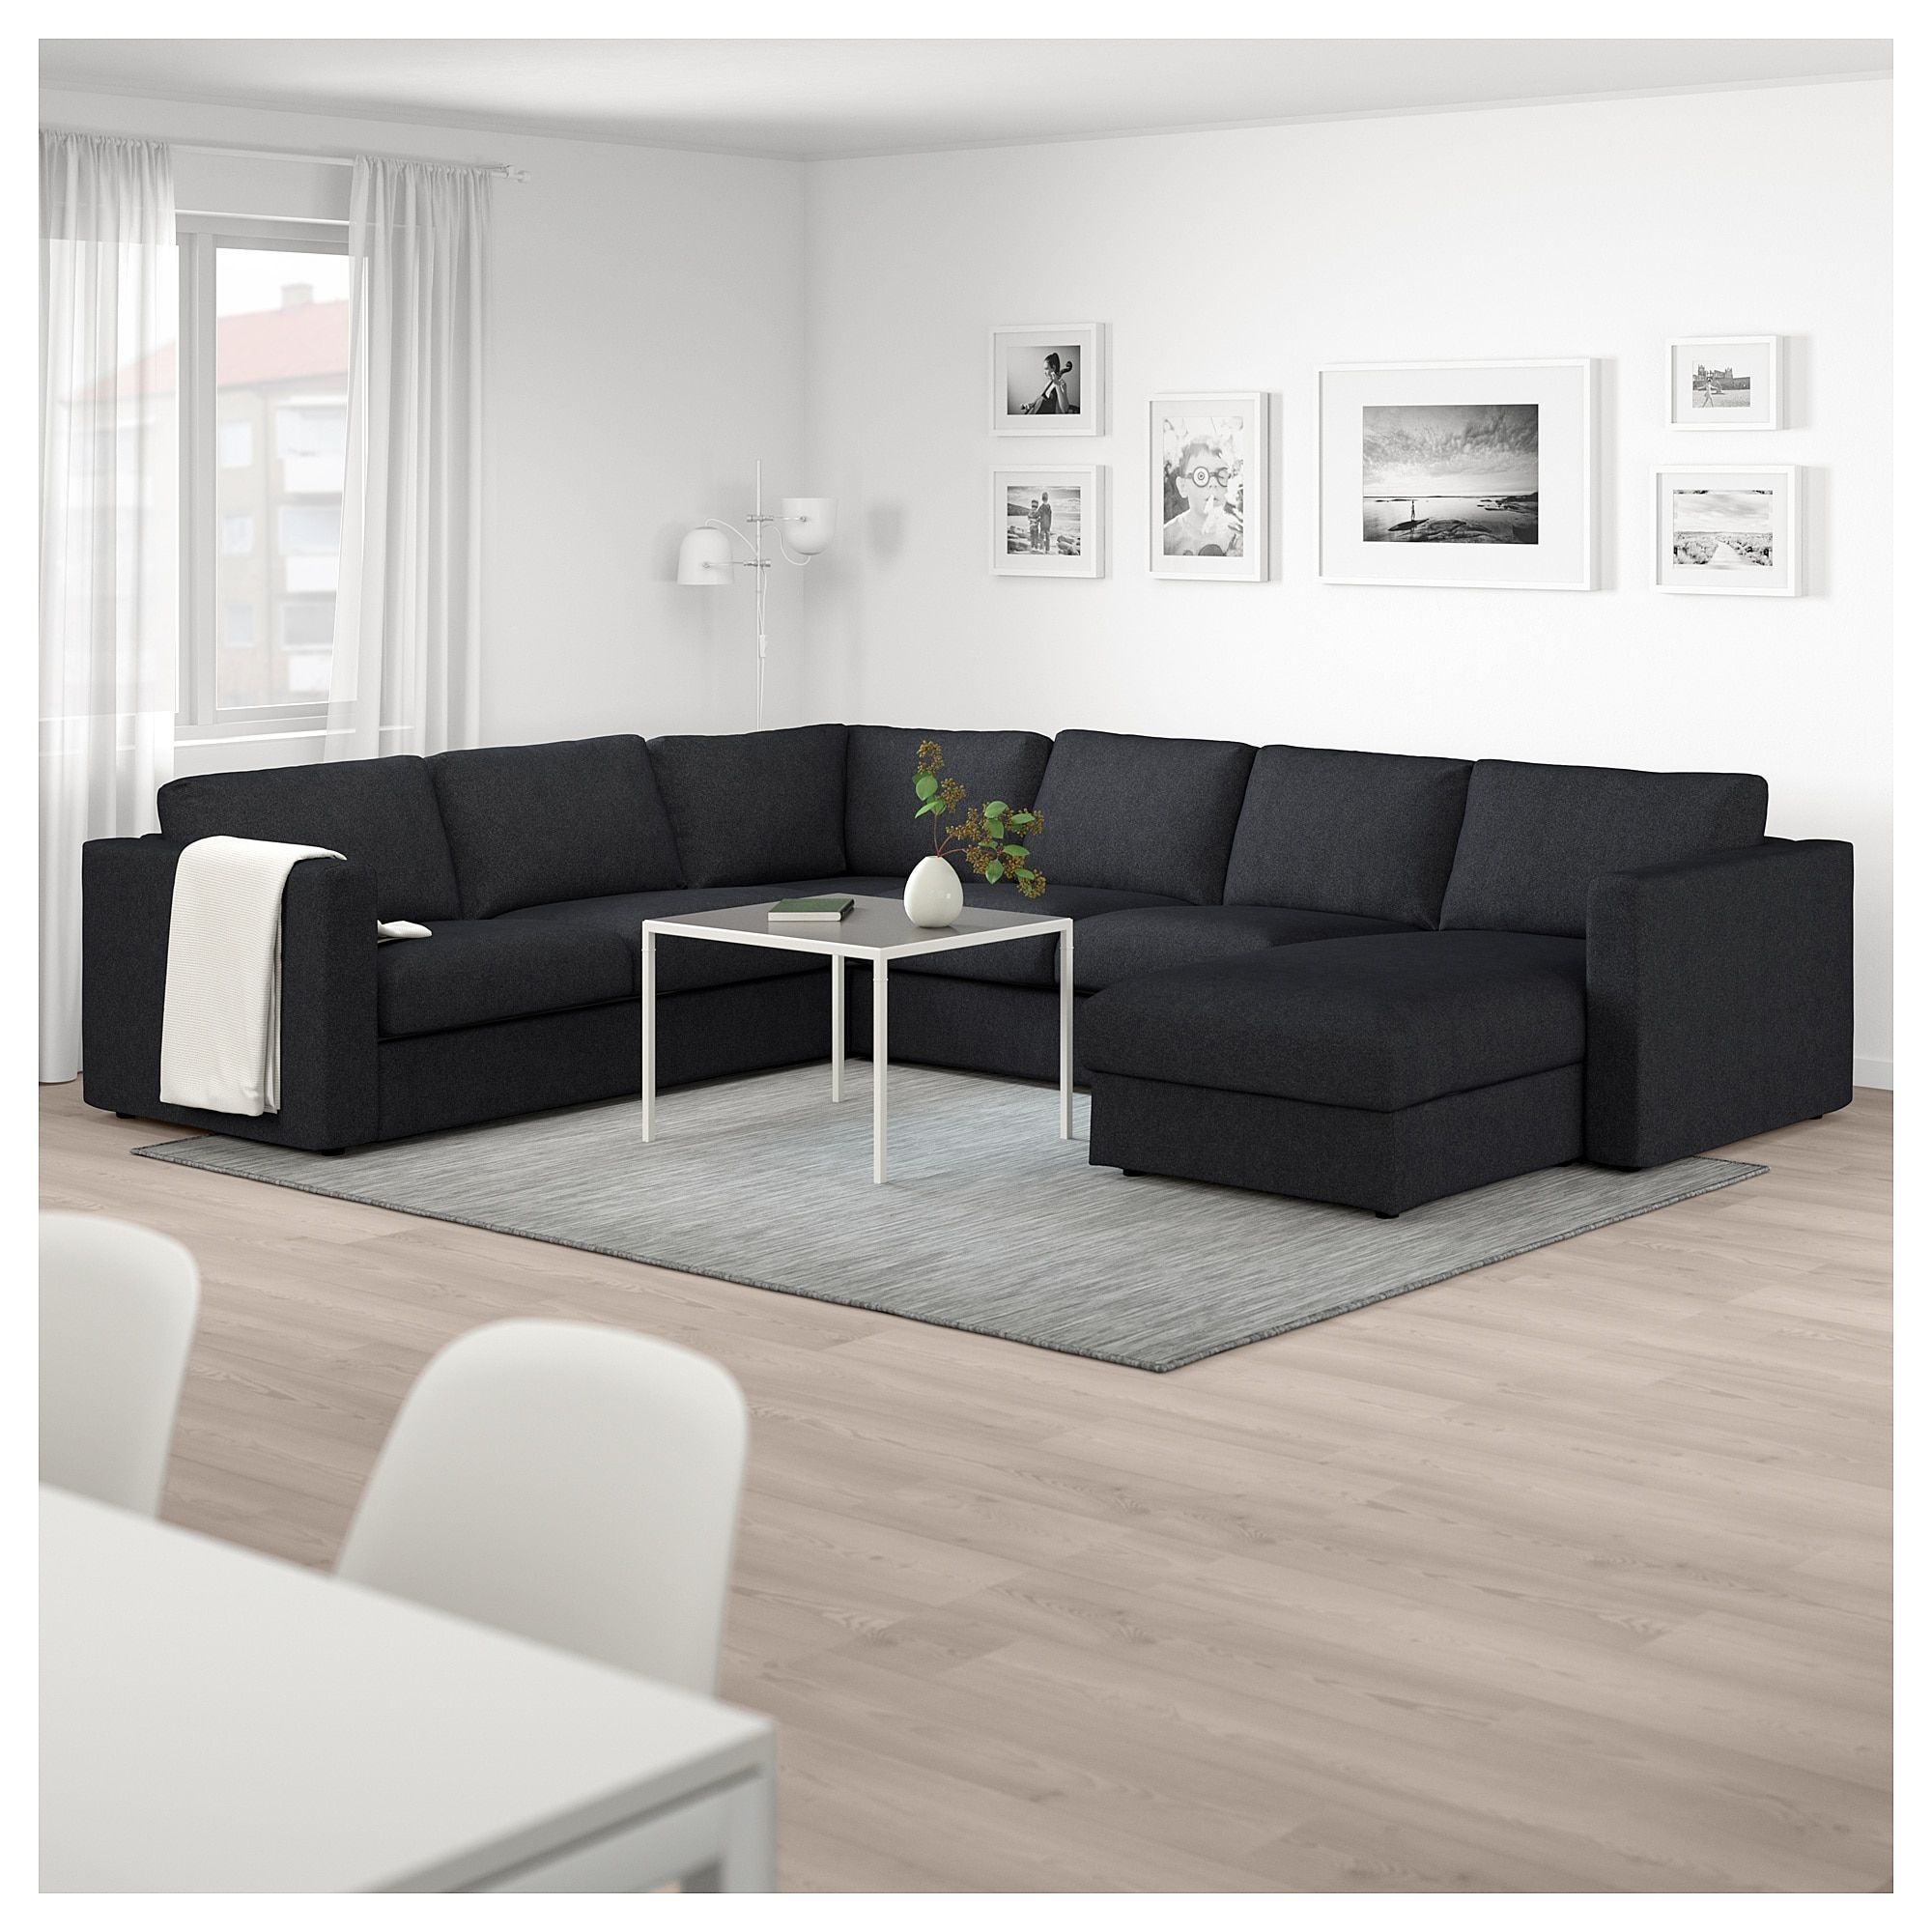 Ikea – Vimle Sectional, 5 Seat Corner With Chaise, Tallmyra Black Regarding Turdur 3 Piece Sectionals With Raf Loveseat (View 23 of 30)